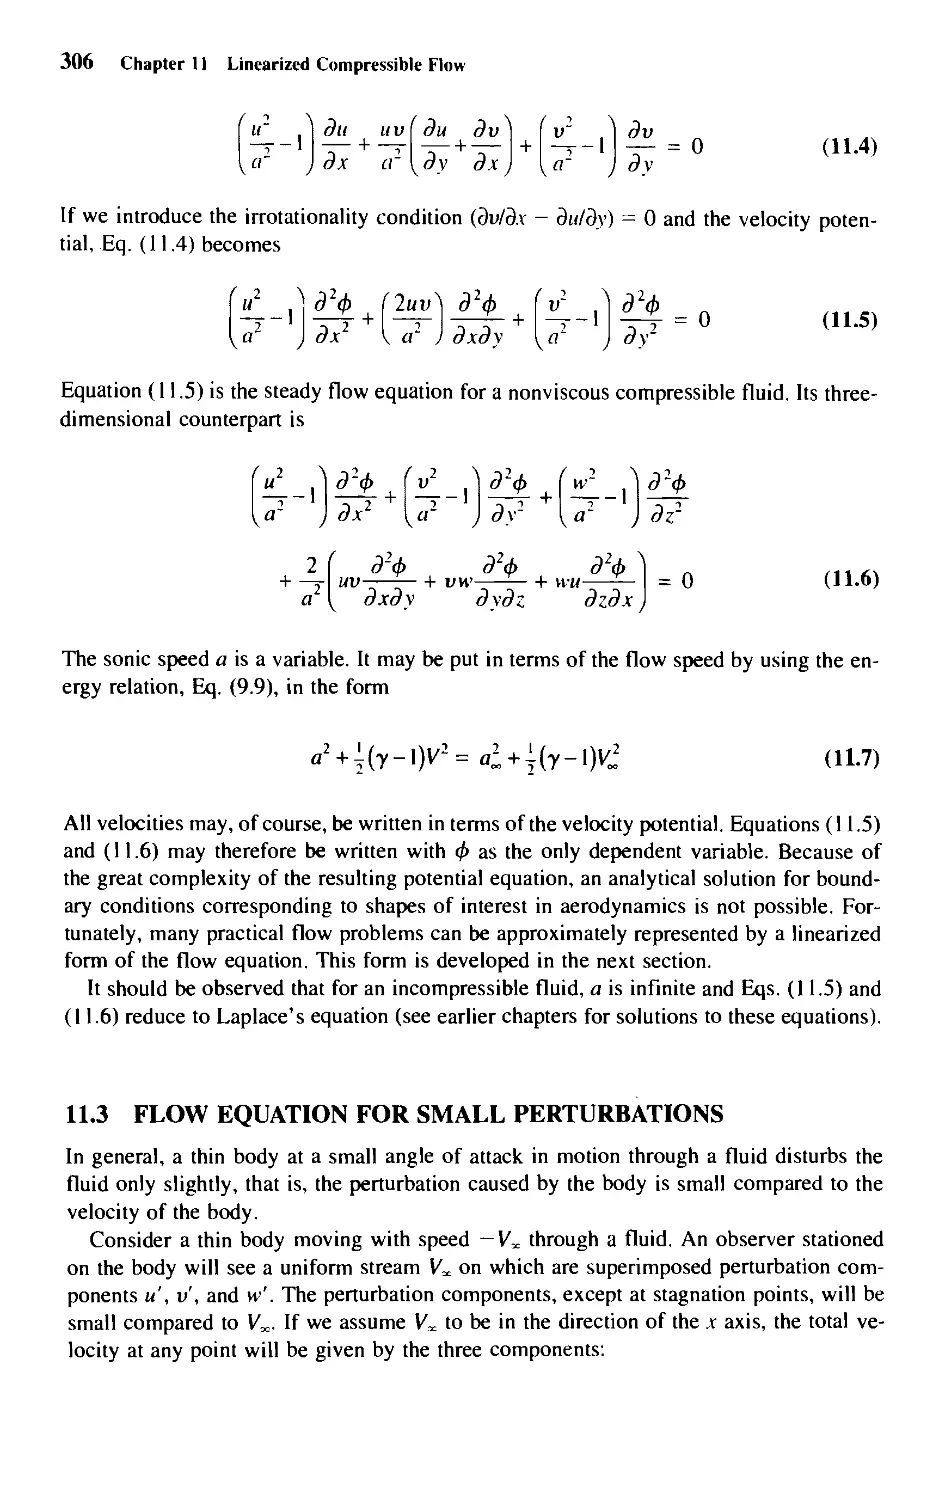 11.3 - Flow Equation for Small Perturbations